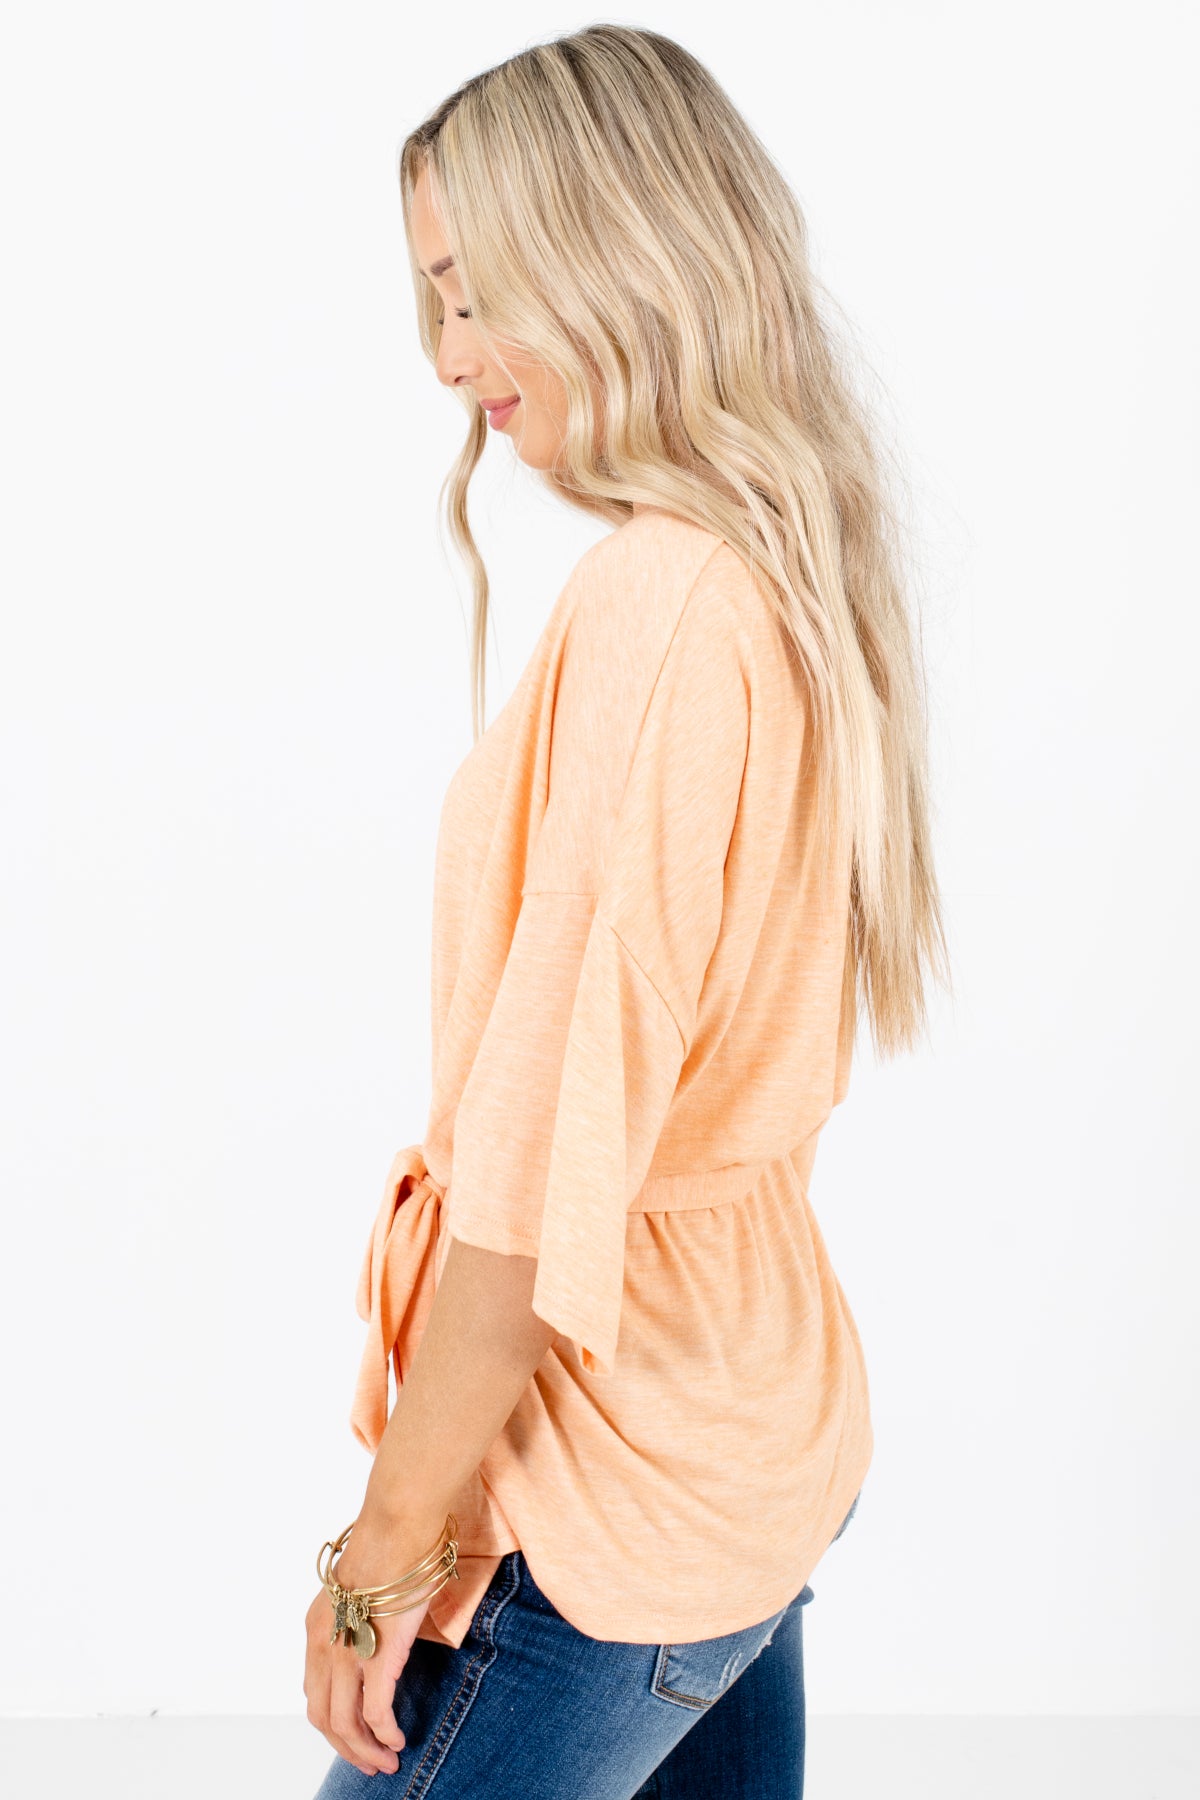 Orange Cute and Comfortable Boutique Tops for Women